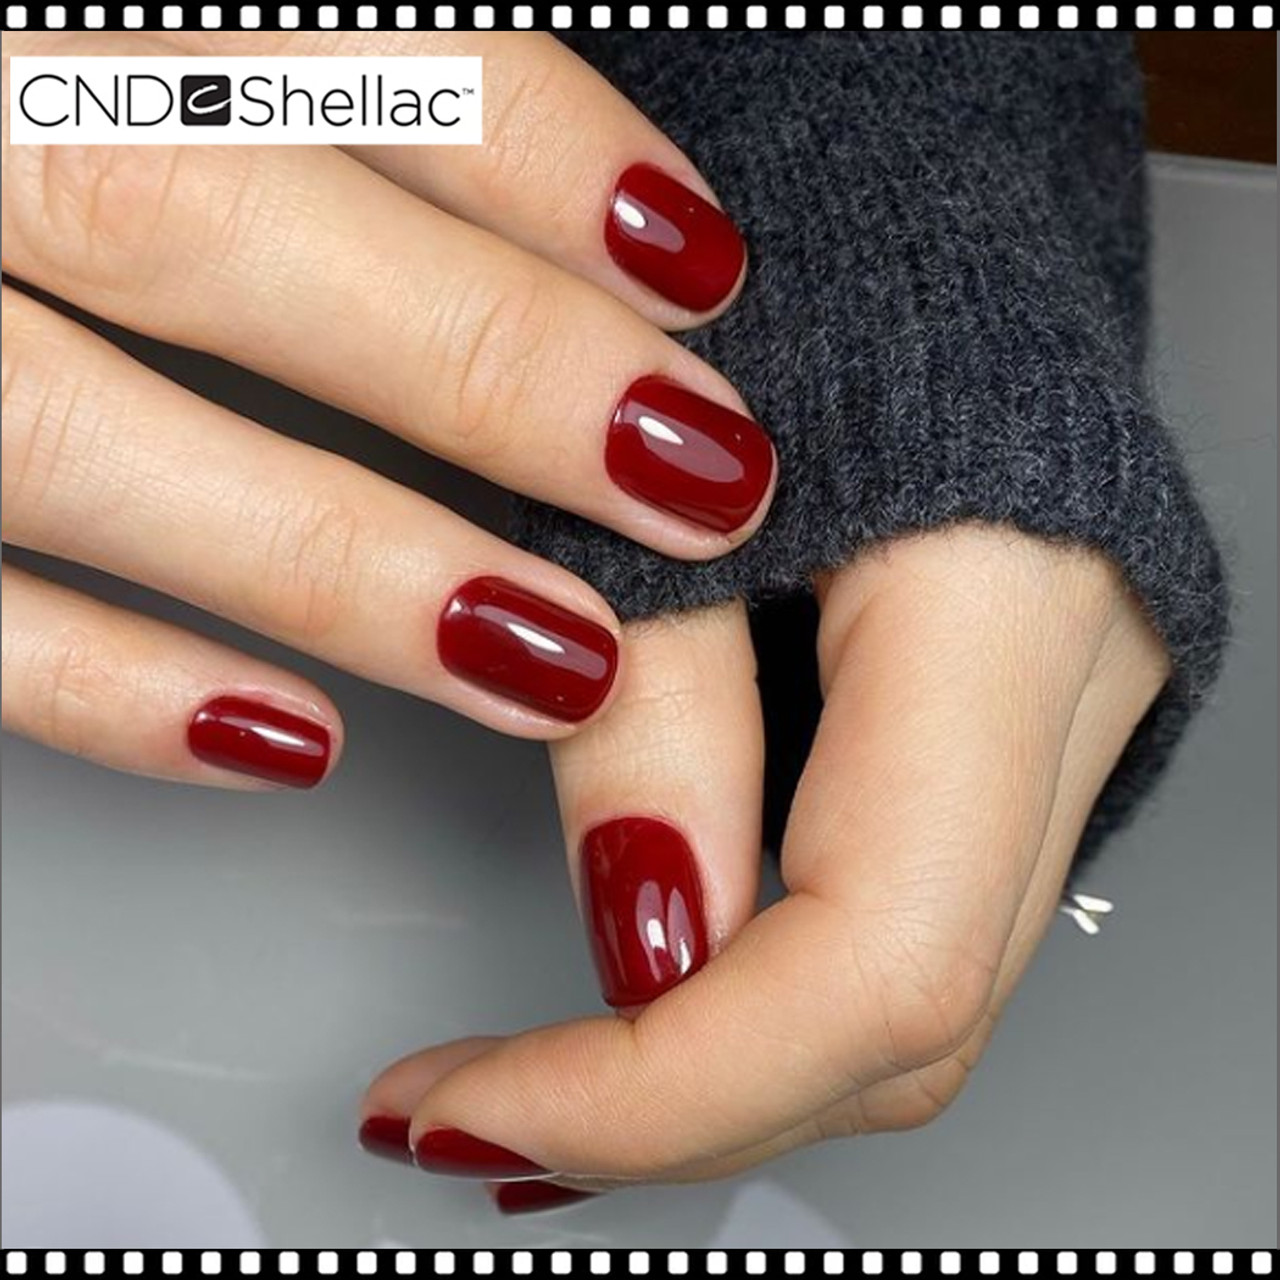 Shellac Vs Dip Nails - Which is better? - Fairy Glamor